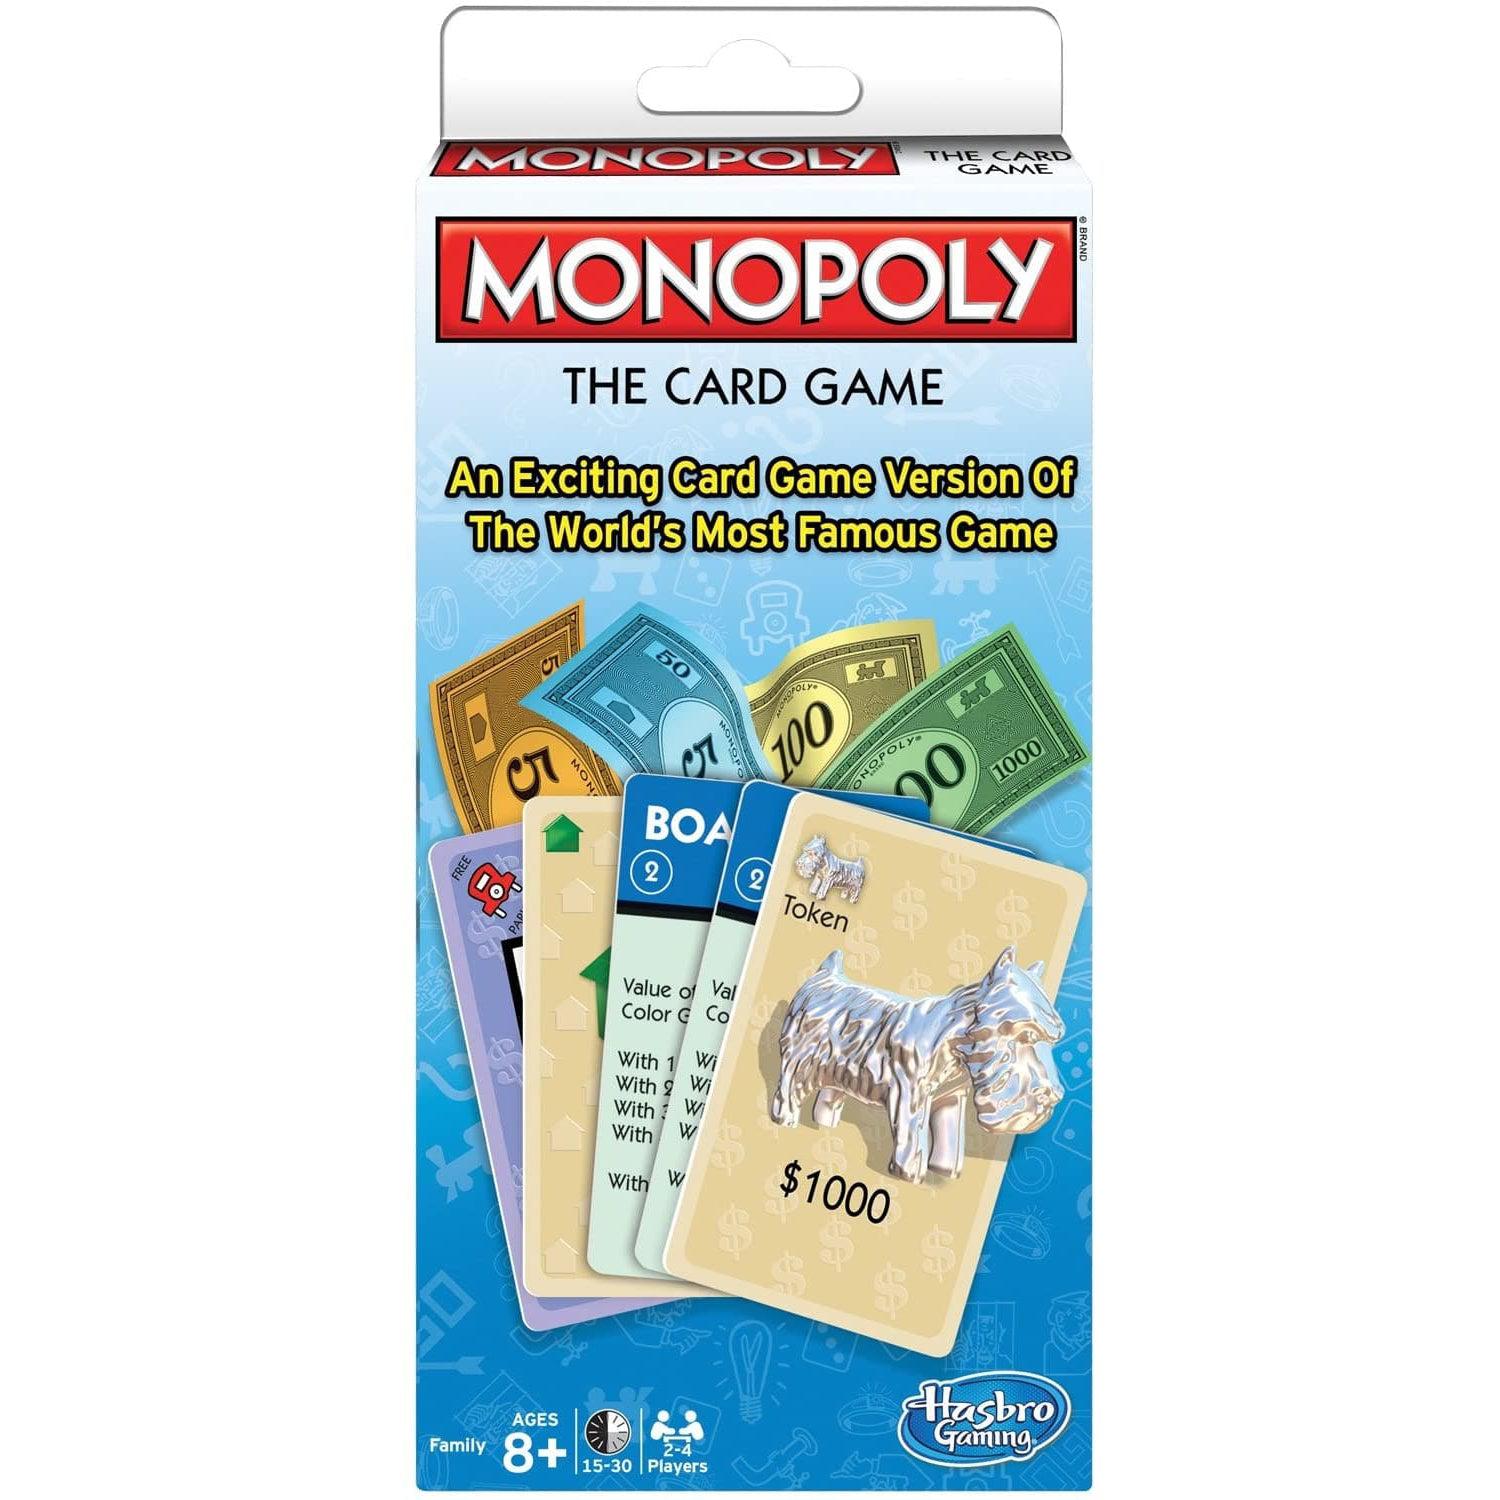 Winning Moves-Monopoly The Card Game-1217-Legacy Toys